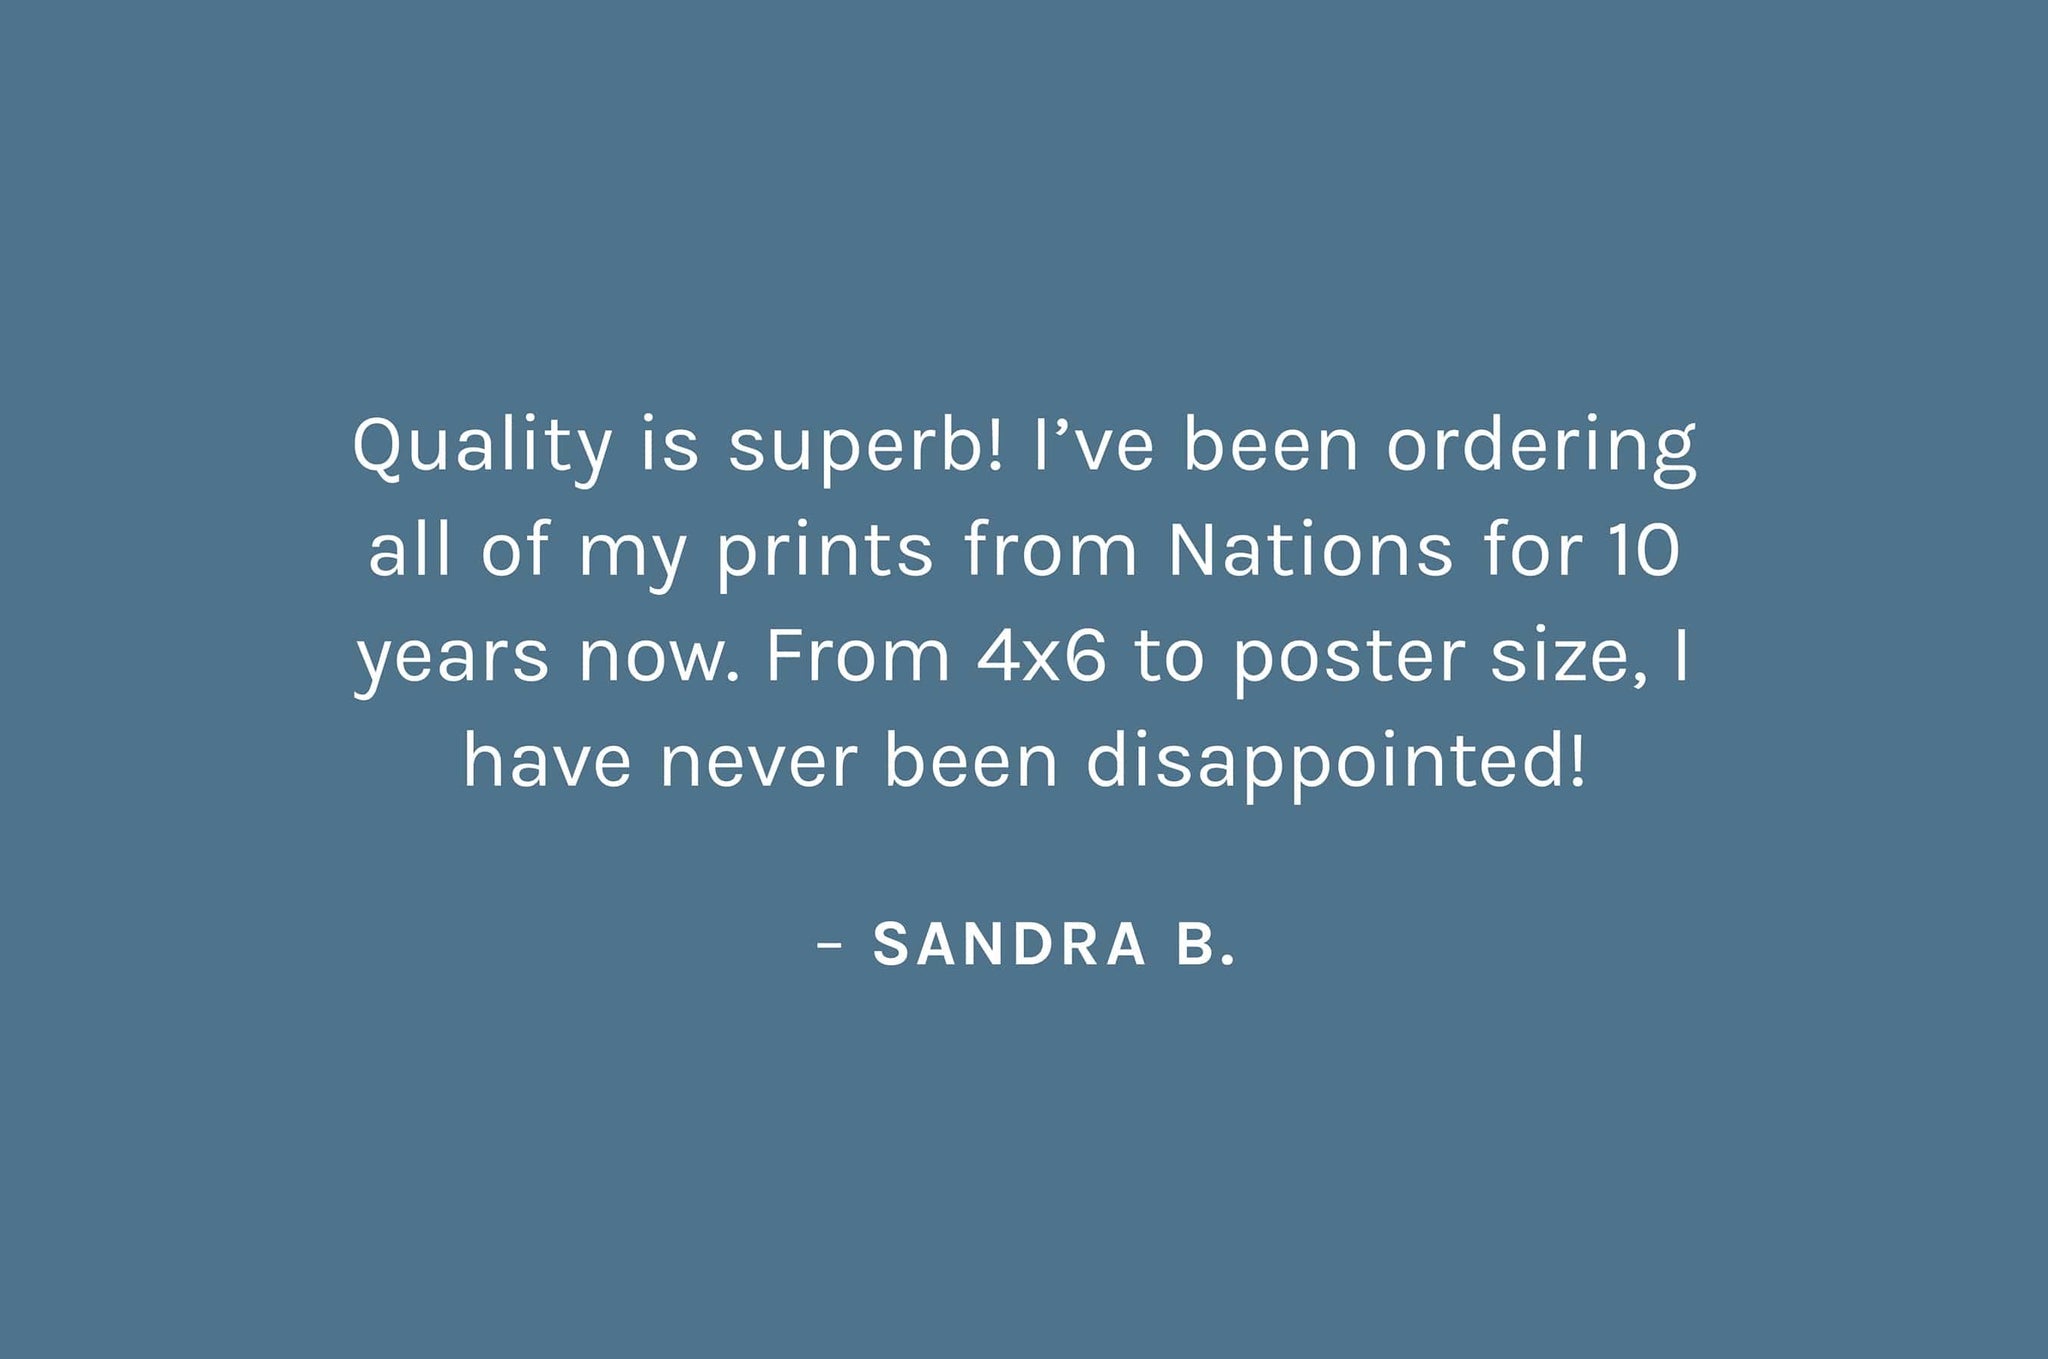 "Quality is superb! I’ve been ordering all of my prints from Nations for 10 years now. From 4x6 to poster size, I have never been disappointed!"   – Sandra B.